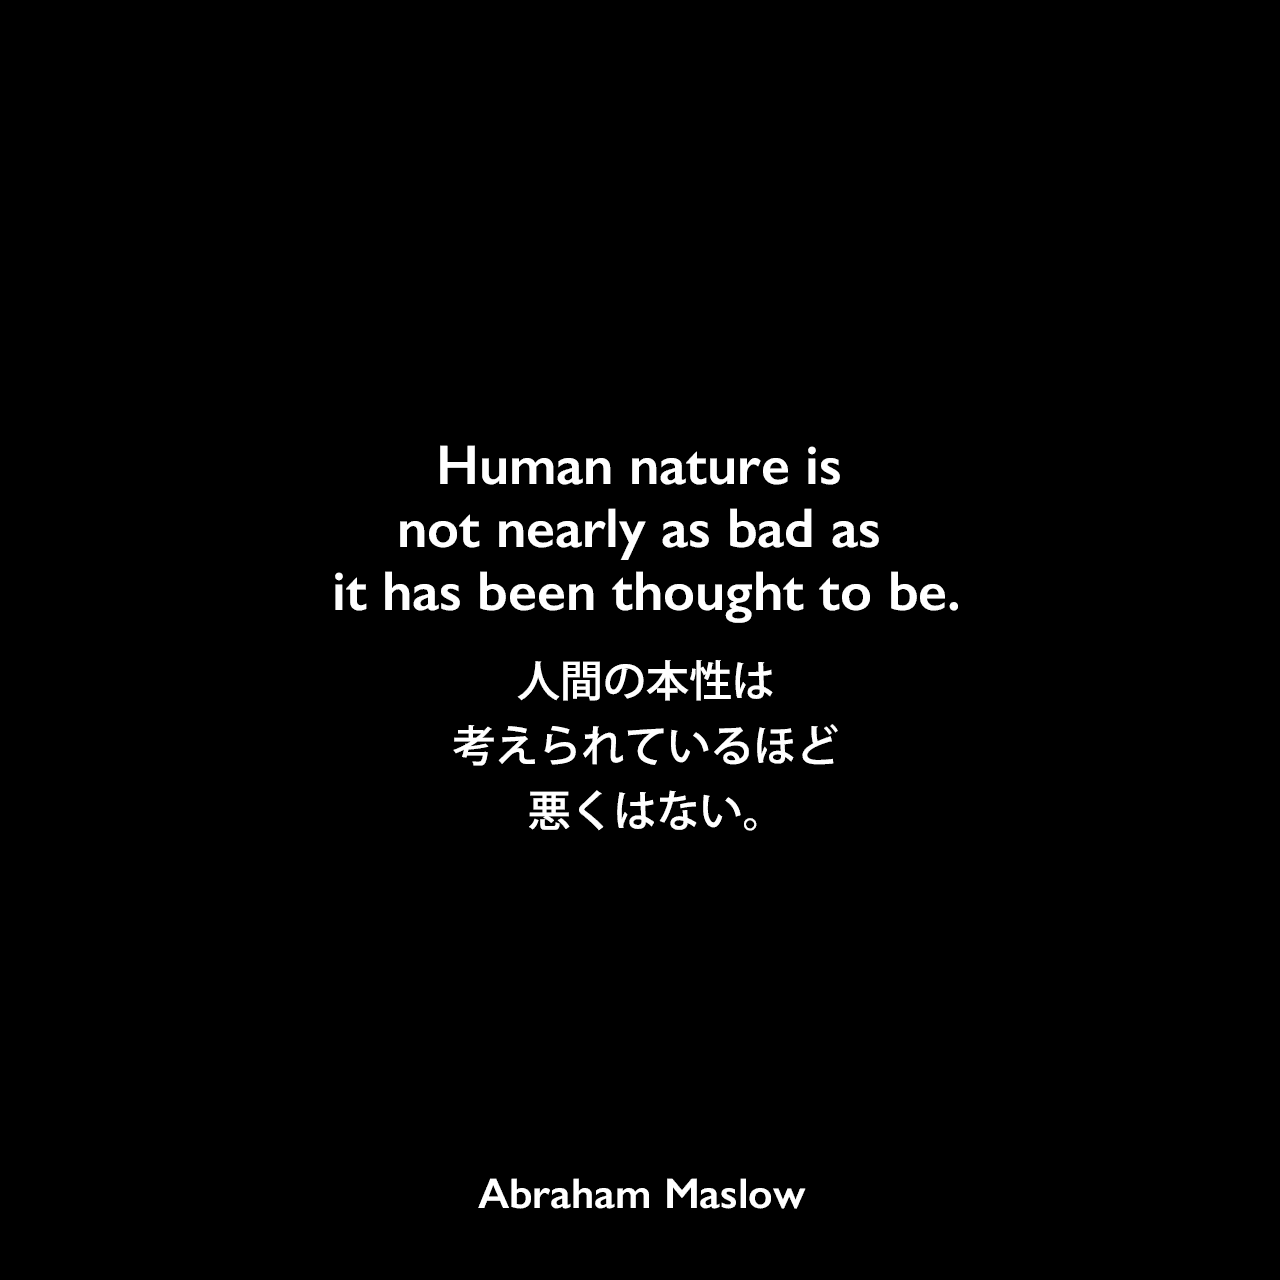 Human nature is not nearly as bad as it has been thought to be.人間の本性は考えられているほど悪くはない。Abraham Maslow